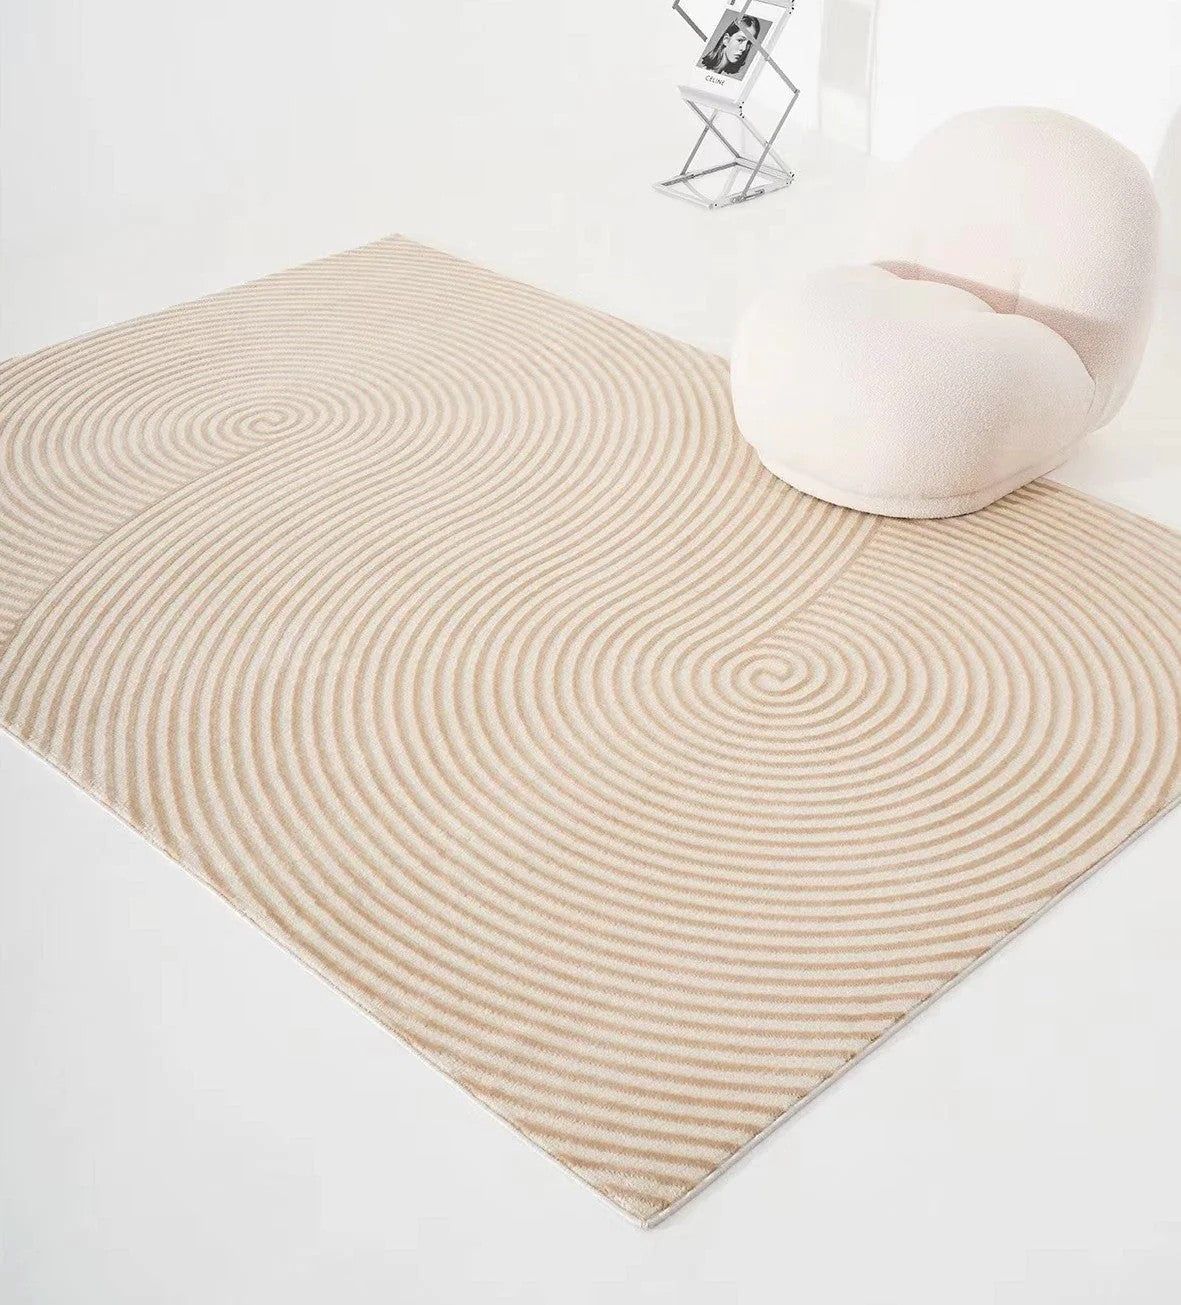 Simple Contemporary Wool Rugs, Mid Century Wool Rugs for Dining Room, Large Modern Rug Placement Ideas for Bedroom, Modern Living Room Rug Ideas